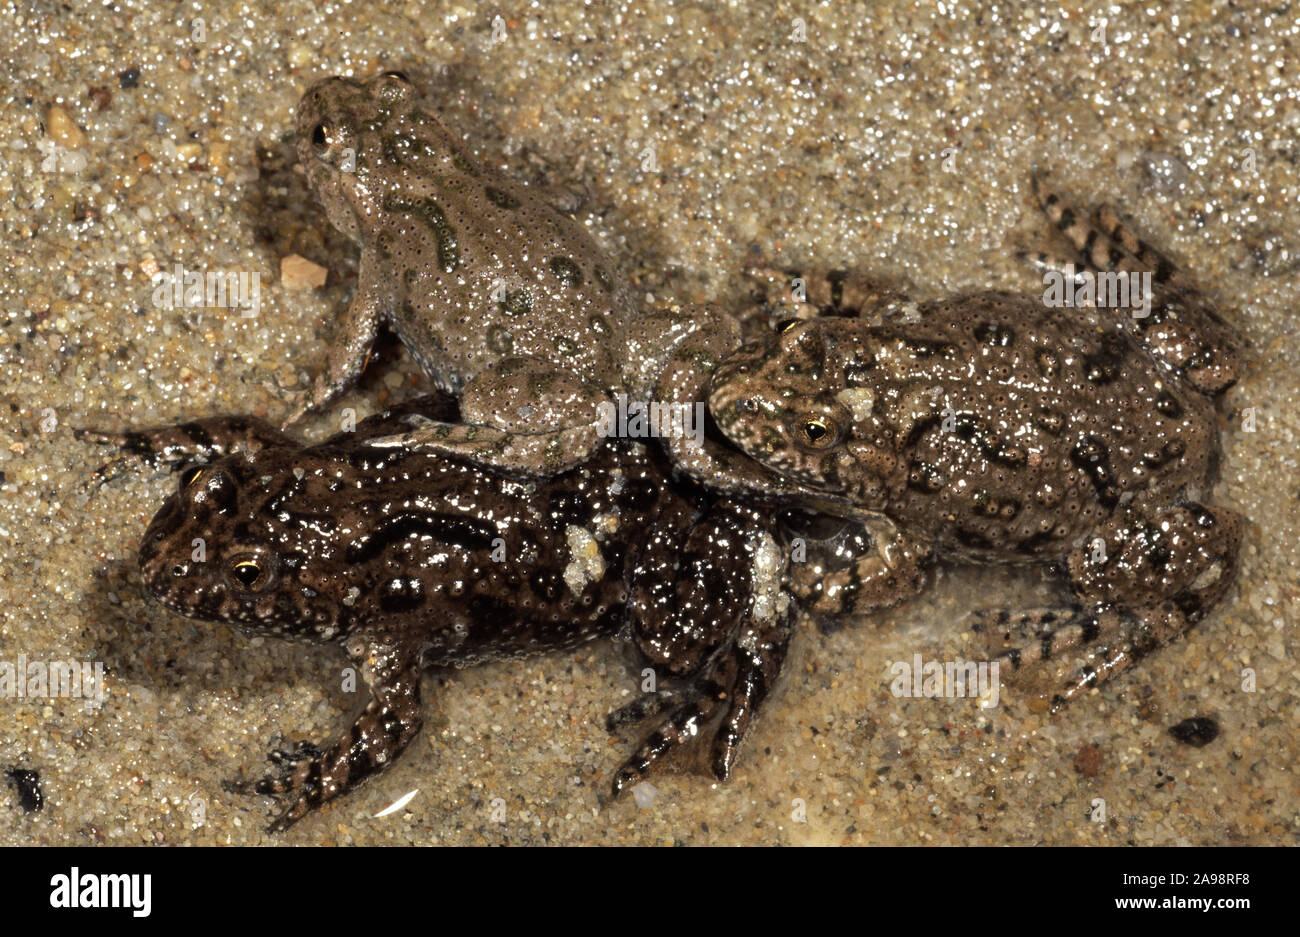 EUROPEAN YELLOW-BELLIED TOAD  (Bombina variegata). Three. Sitting on a background of wet sand. Compare front darker skin animal a later addition Stock Photo